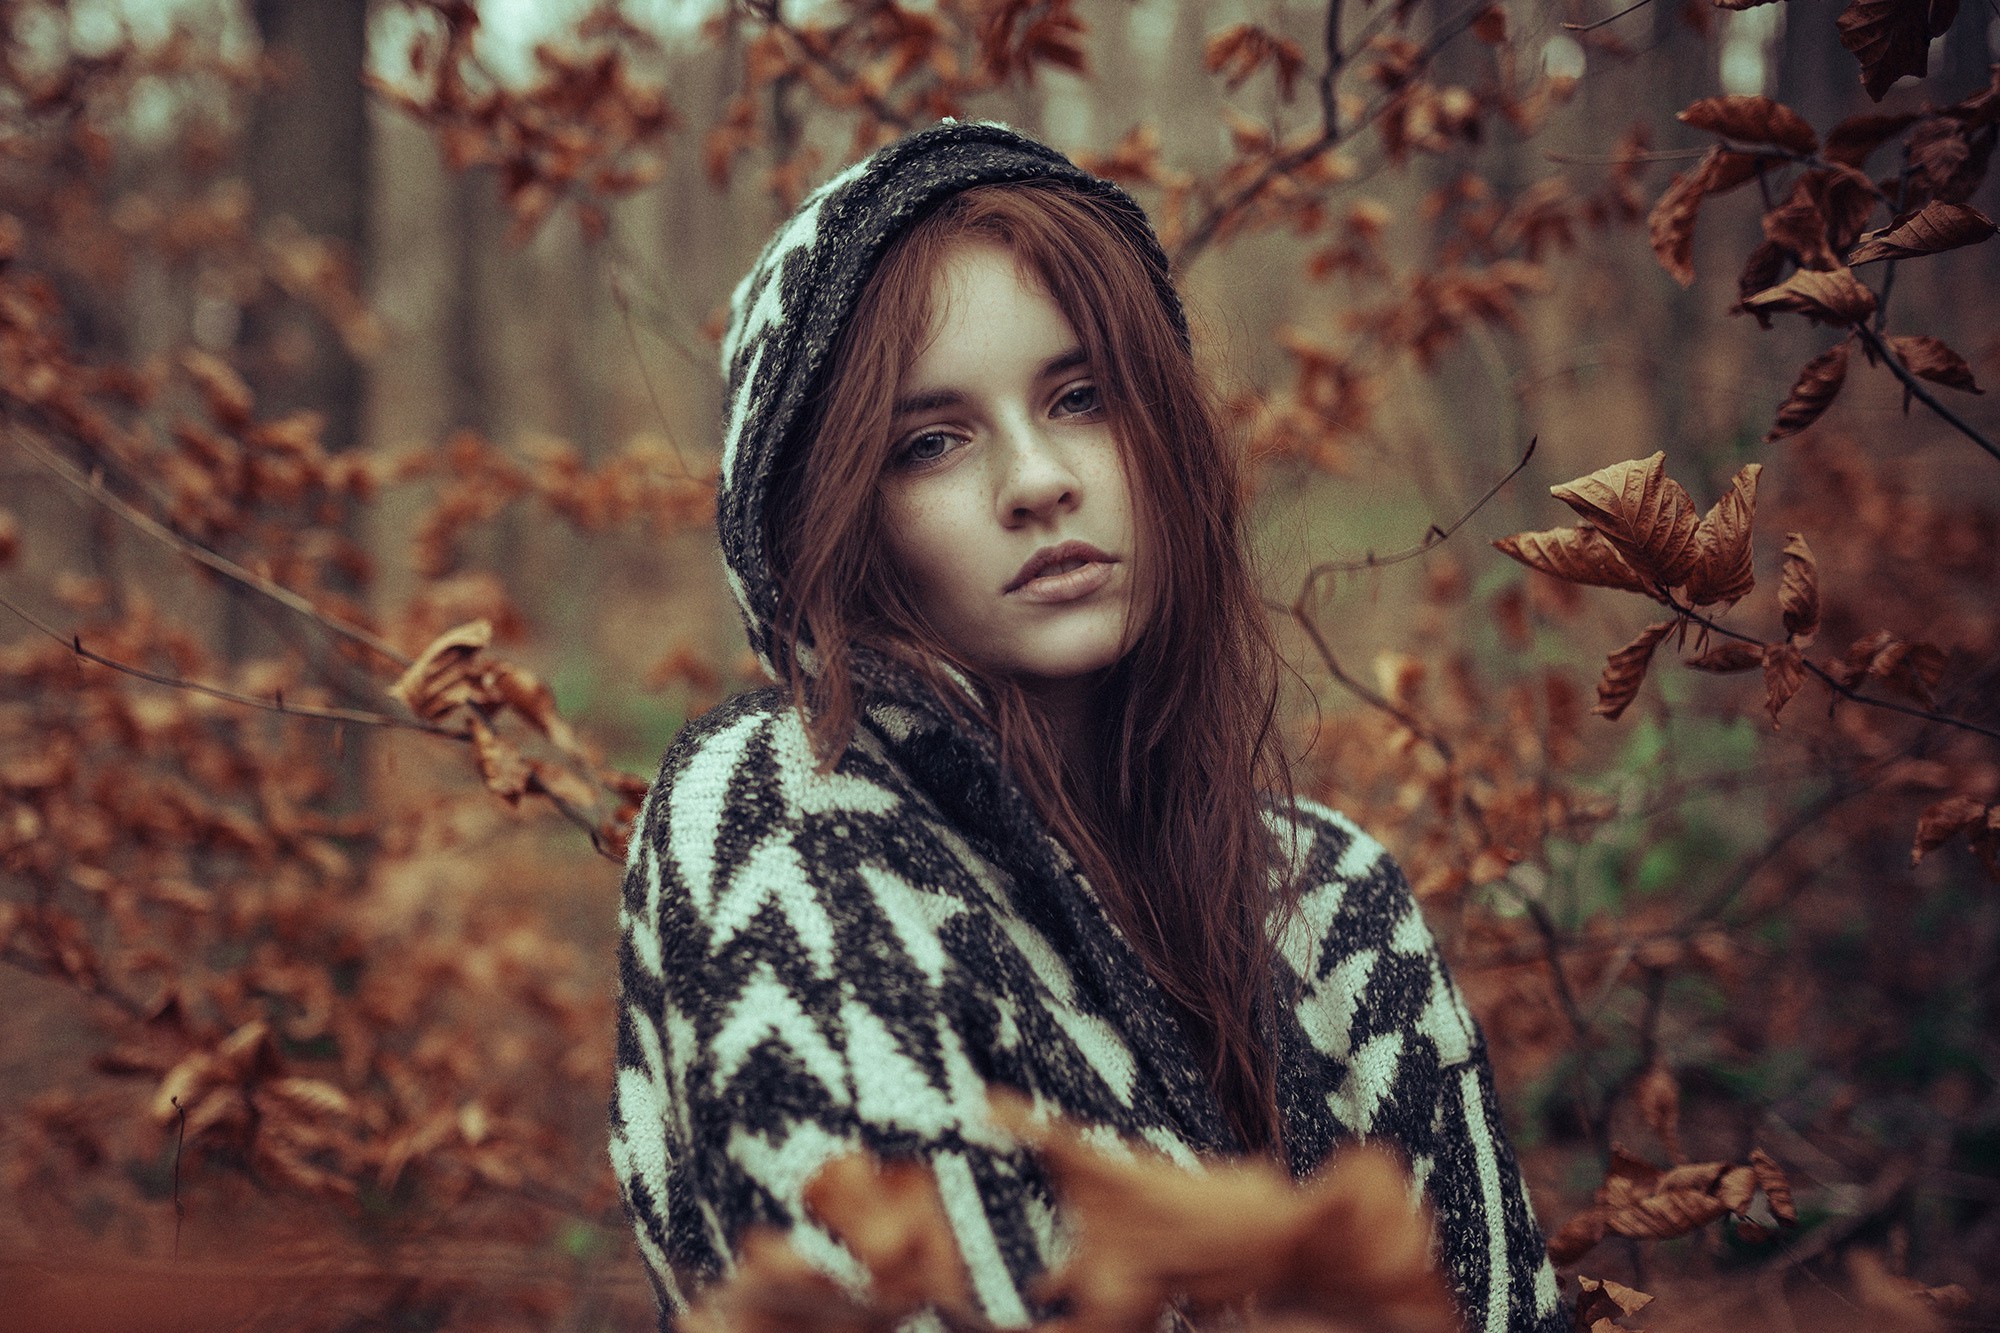 Women Model Redhead Long Hair Women Outdoors Looking At Viewer Nature Trees Forest